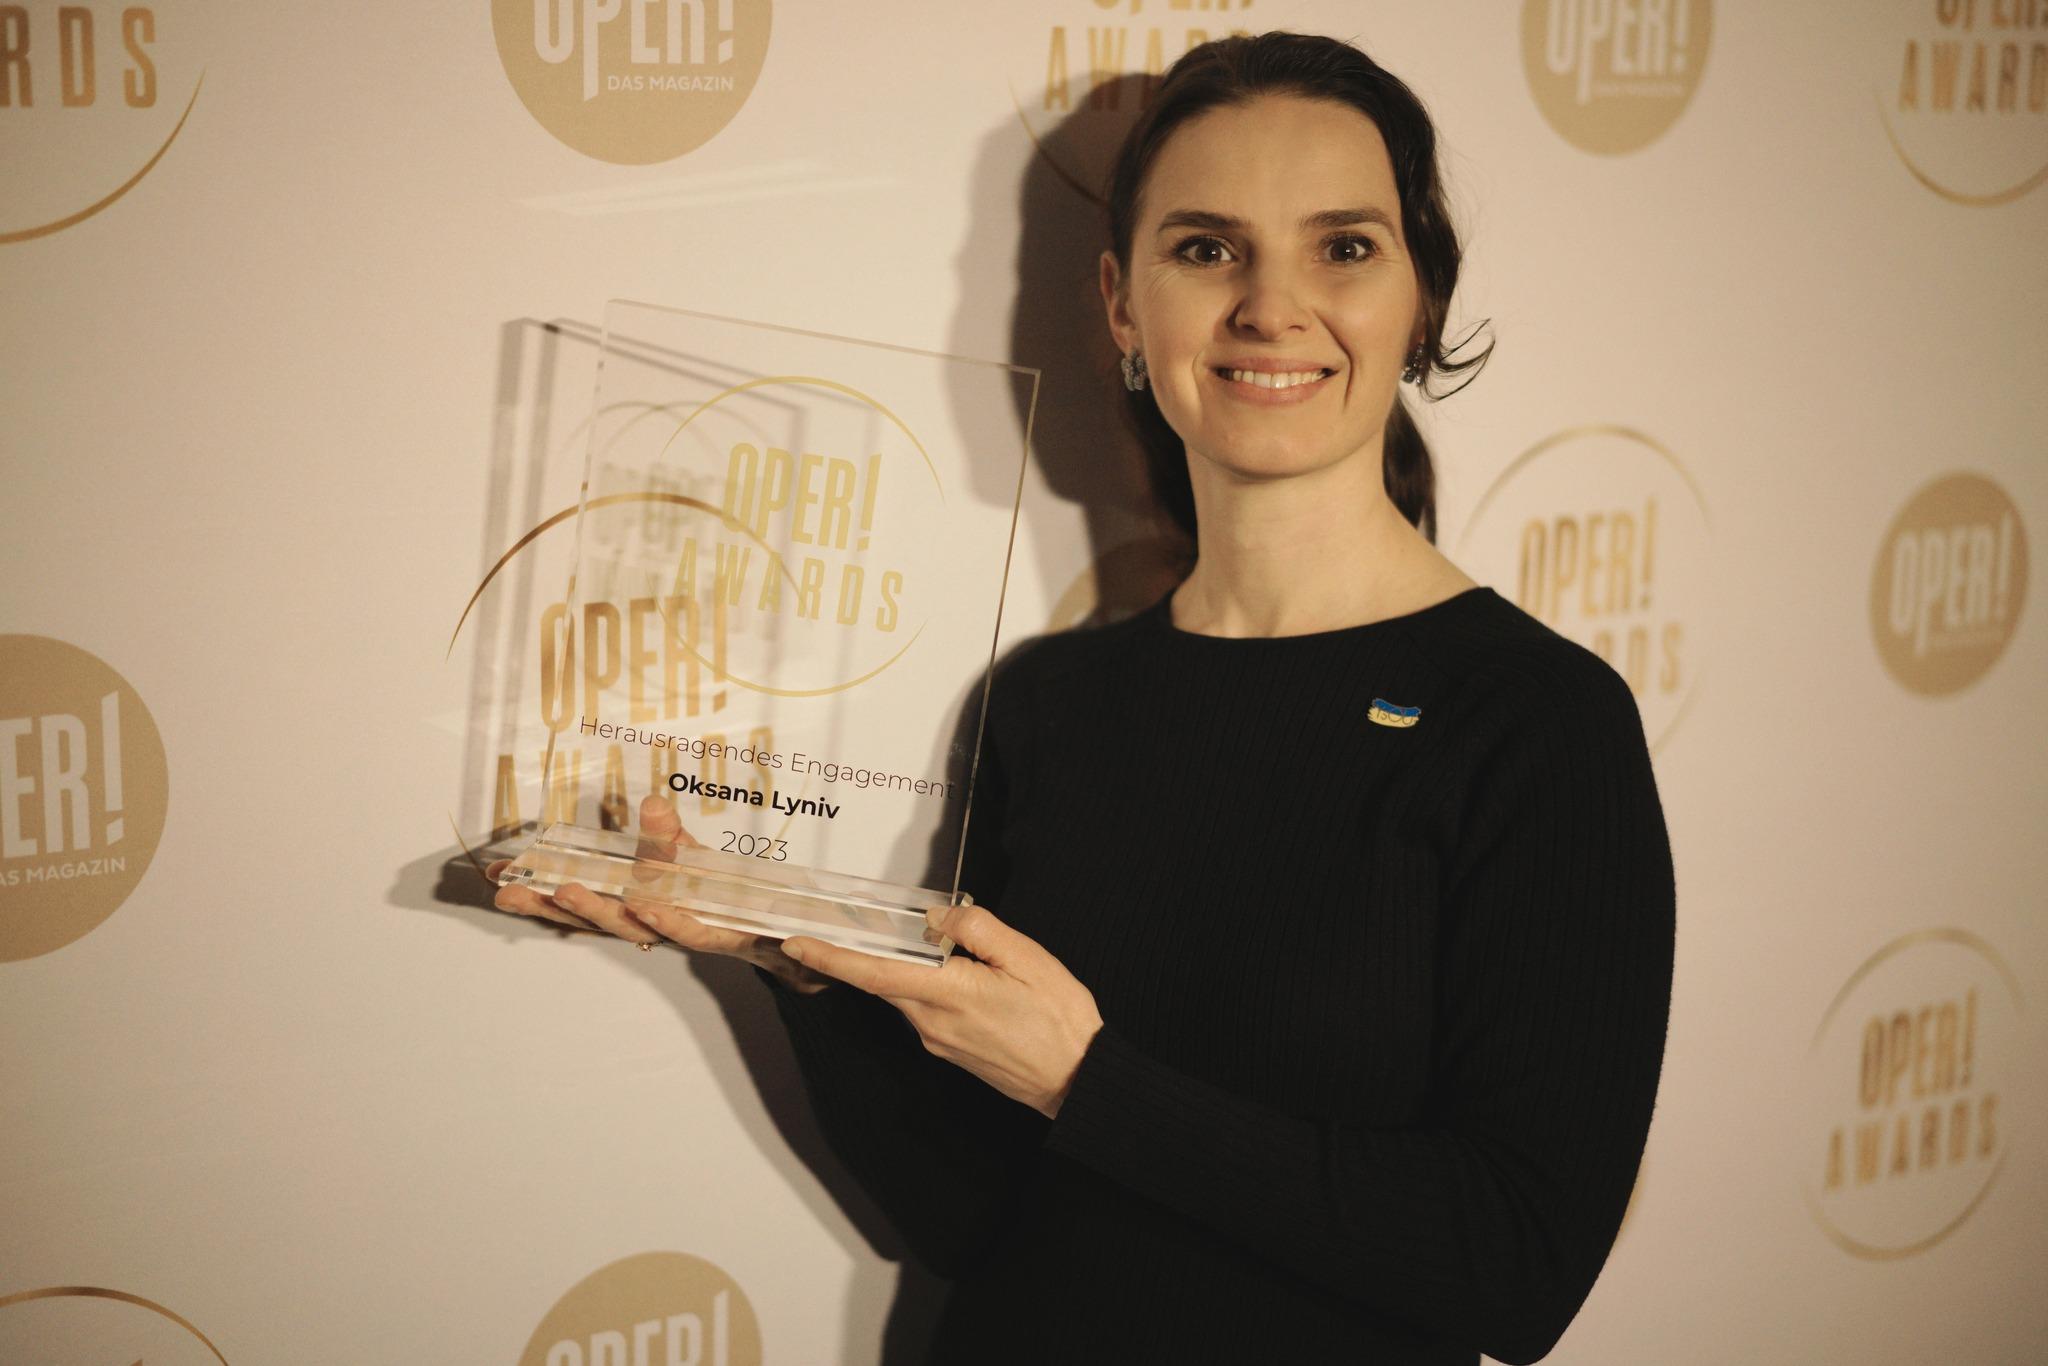 Ukrainian conductor Oksana Lyniv received the award "For significant contribution" from the Oper!Awards 2023